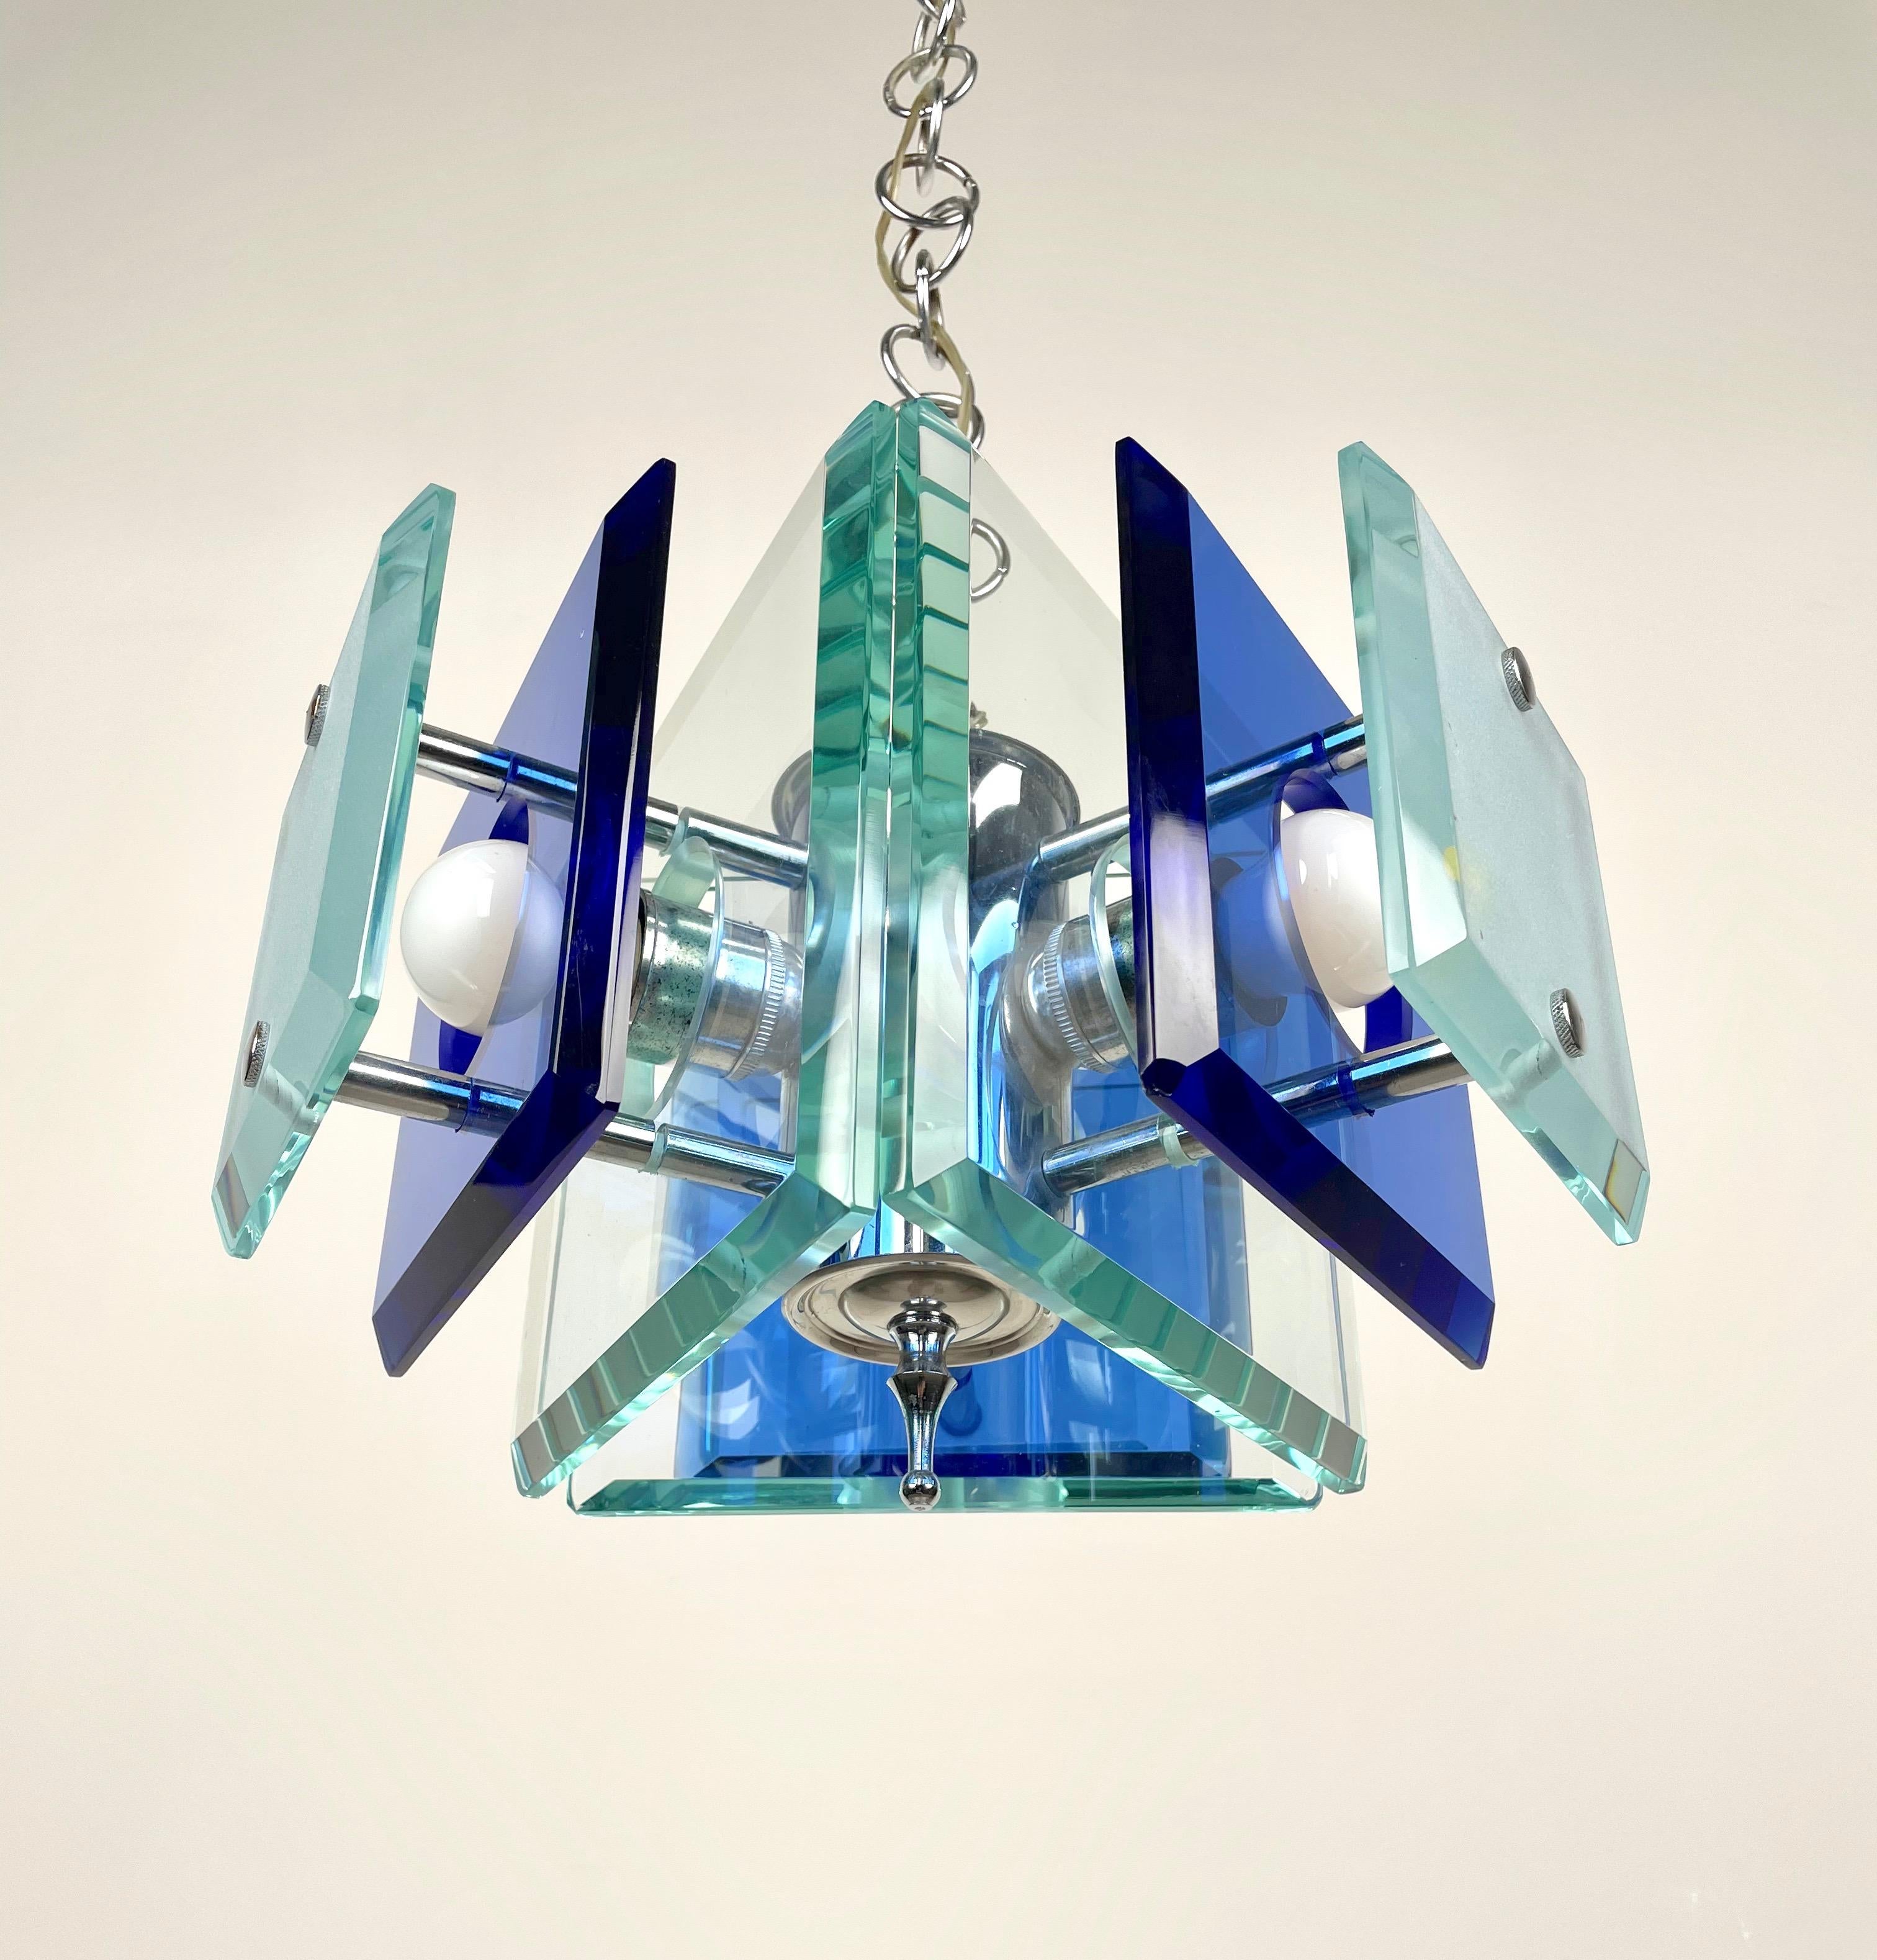 Lupi Cristal Luxor Blue Glass and Chrome Chandelier, Italy, 1970s For Sale 2